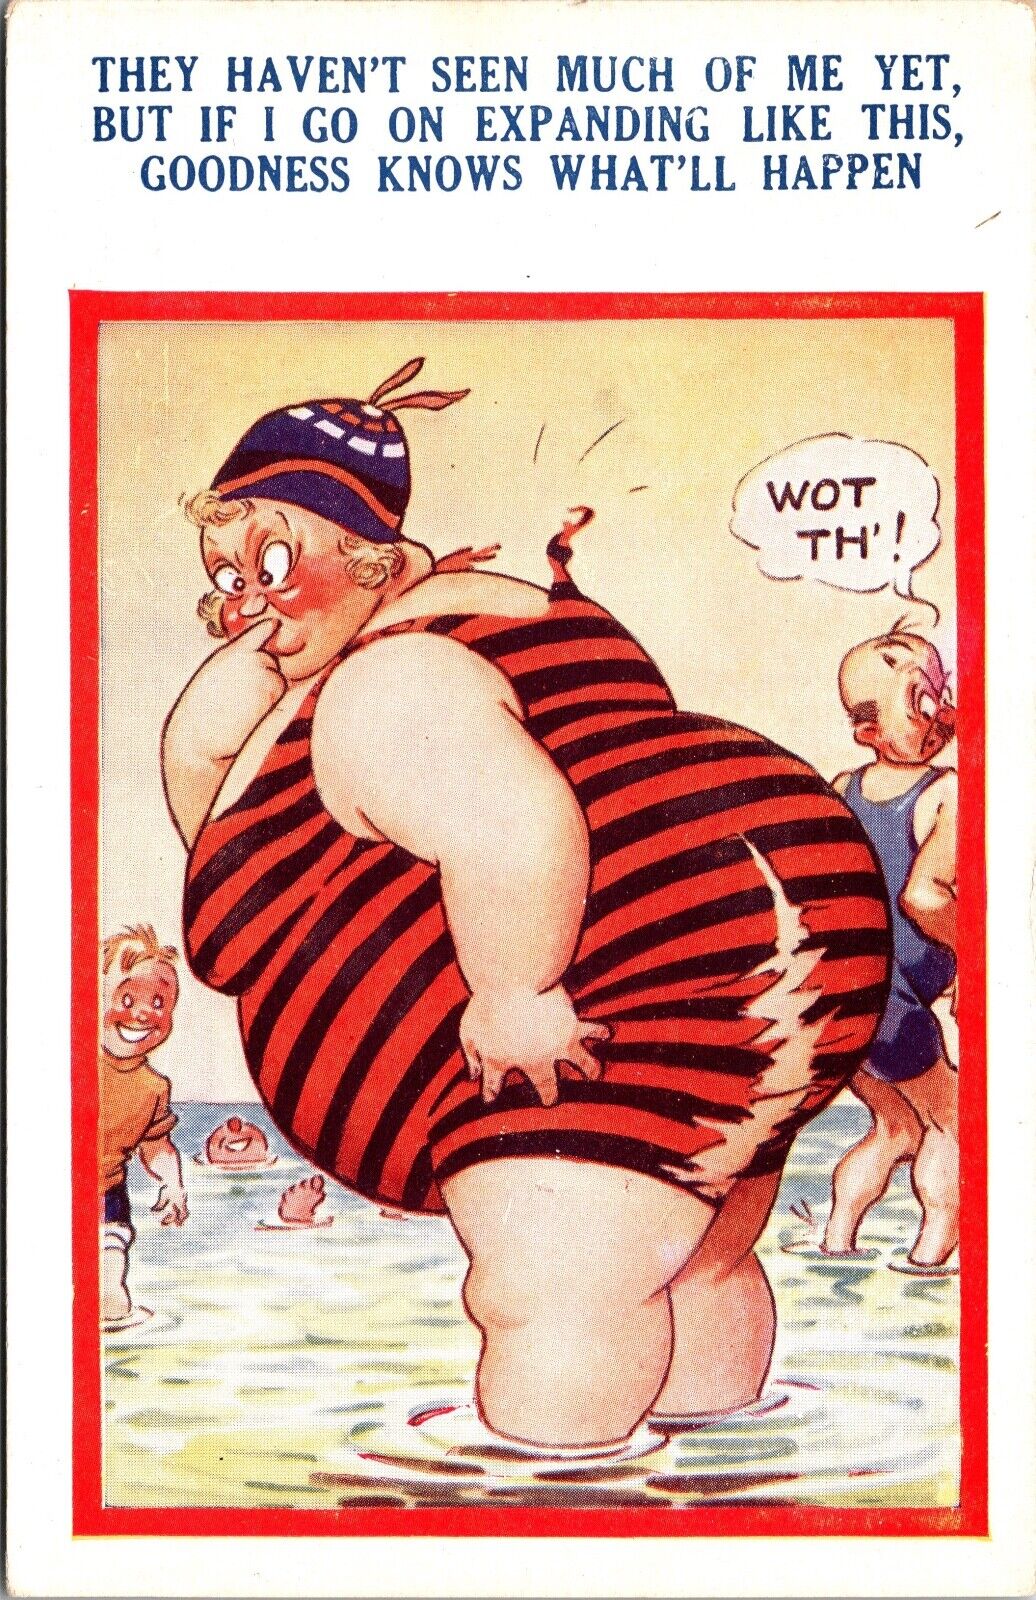 Bamforth Saucy Seaside Vacation Series Bathing Suit Fat Woman Risque P.UN. N-226